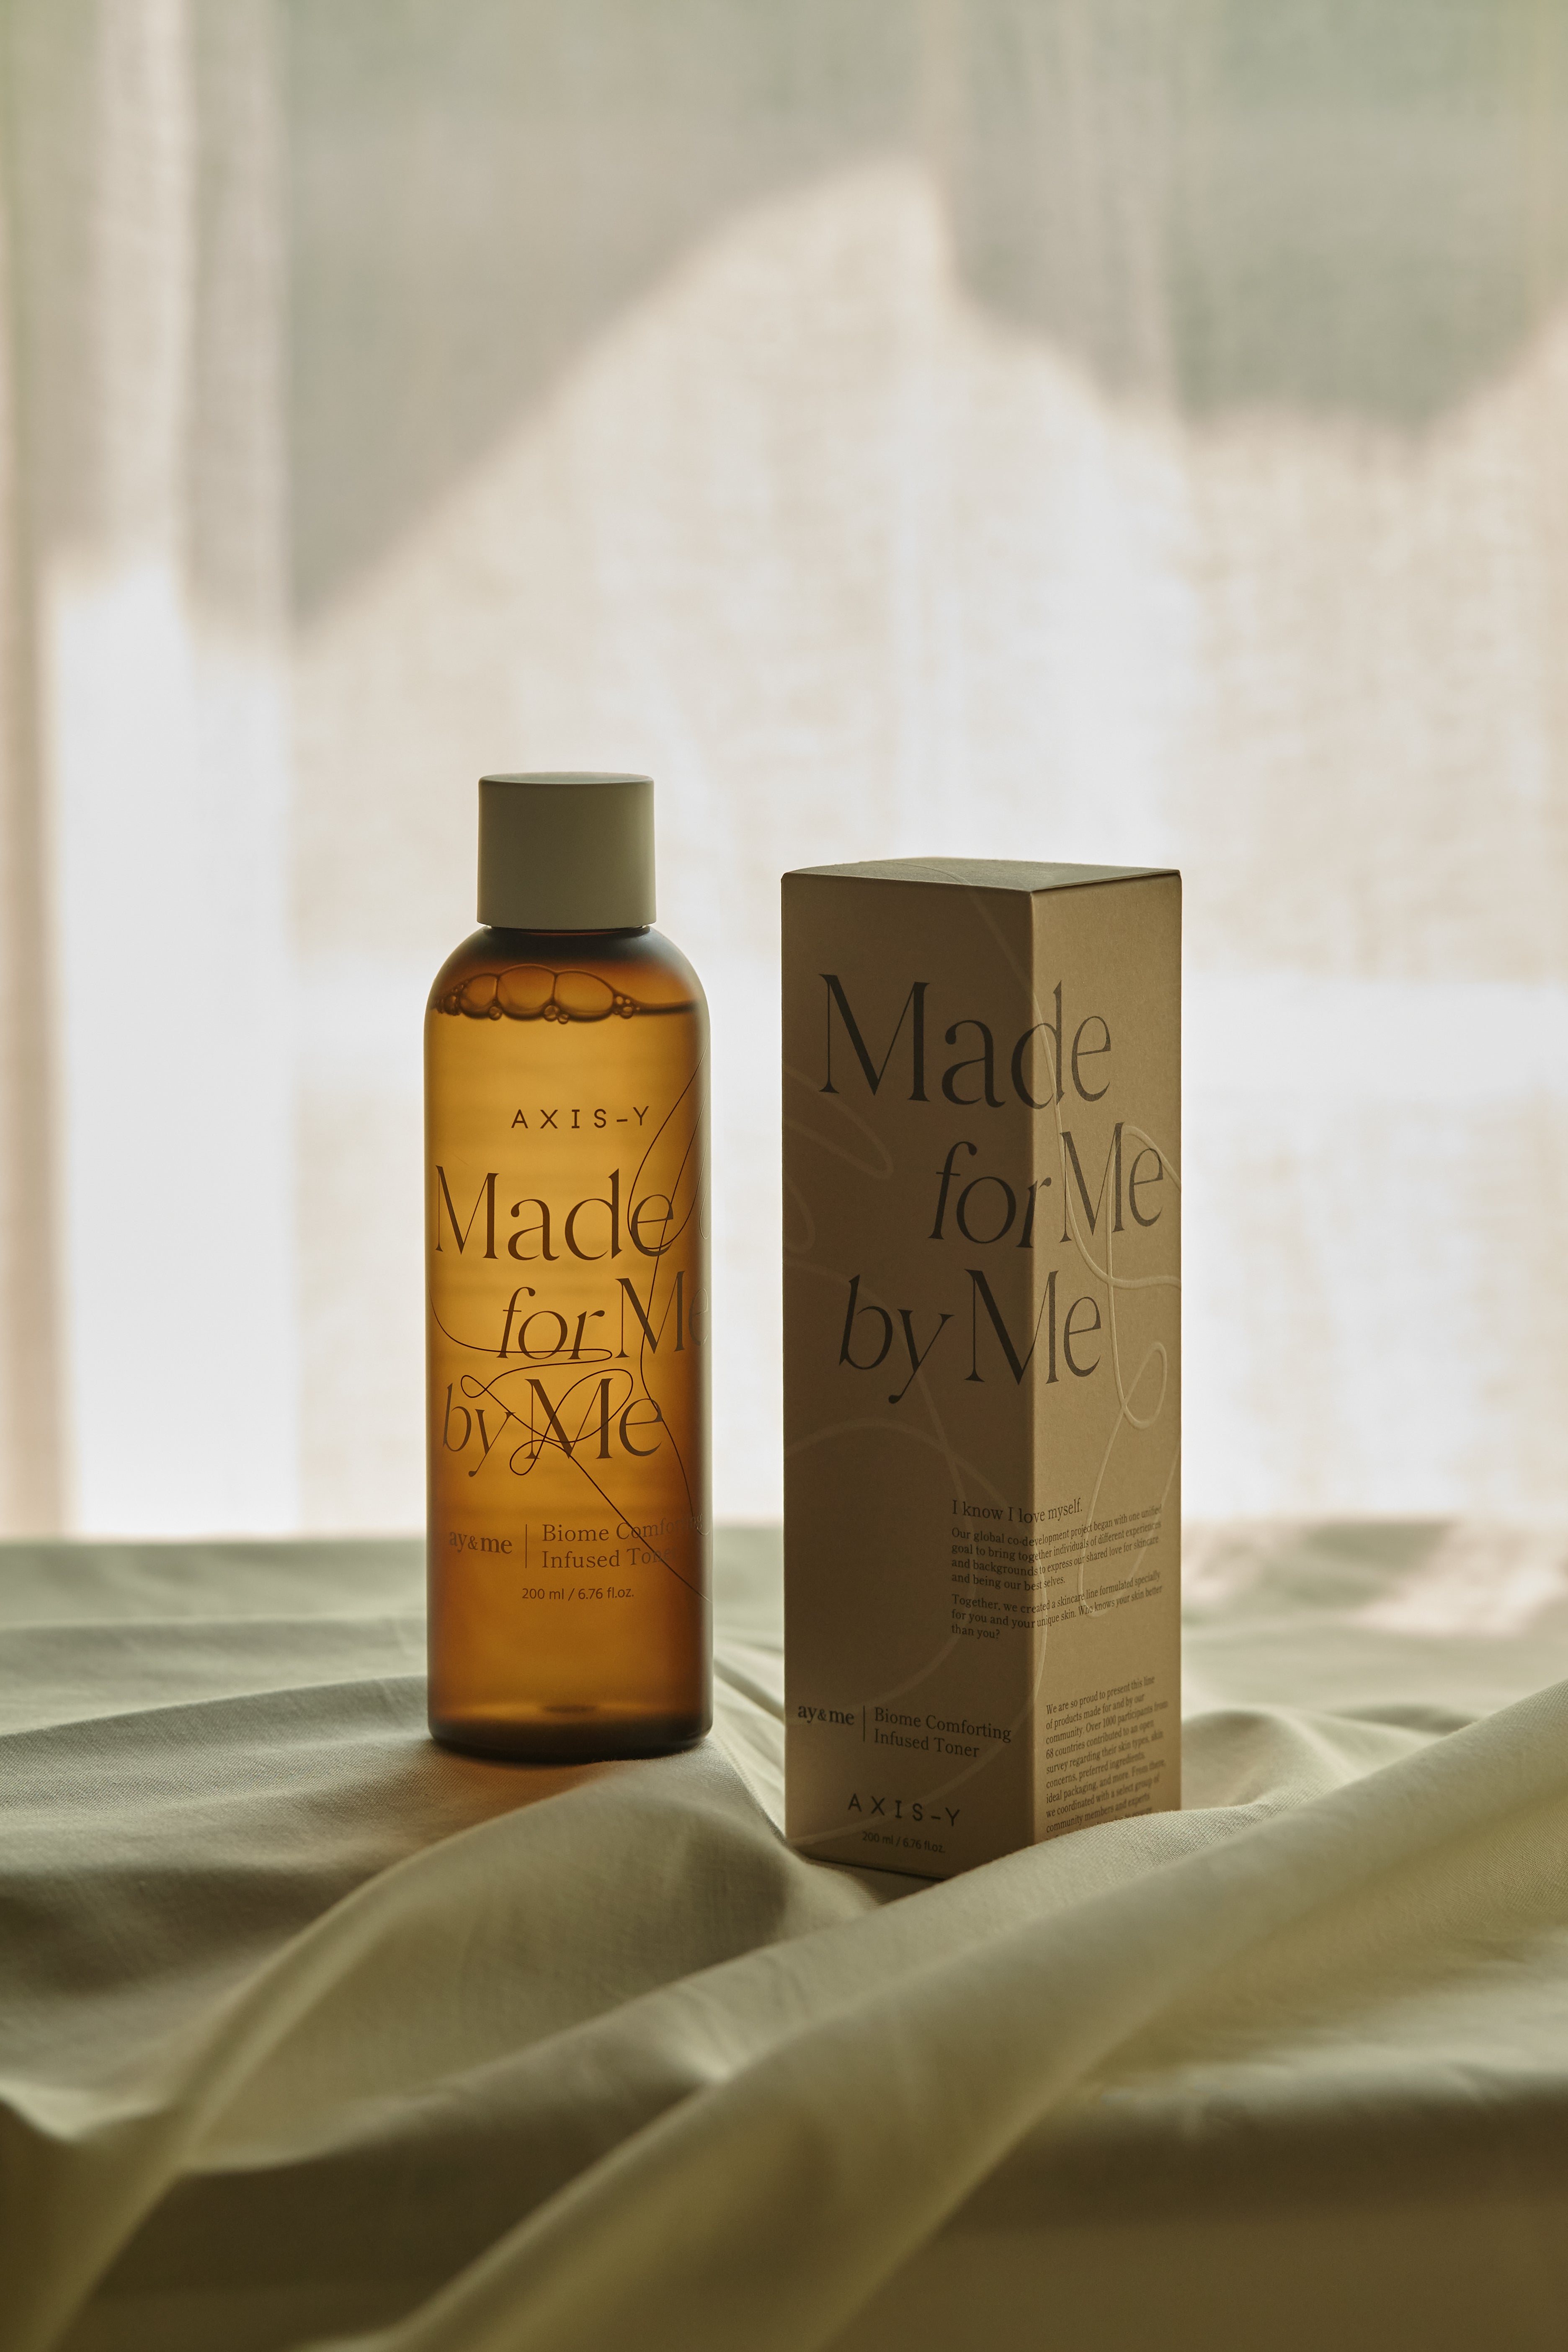 Axis-y Biome Comforting Infused Toner 200ml